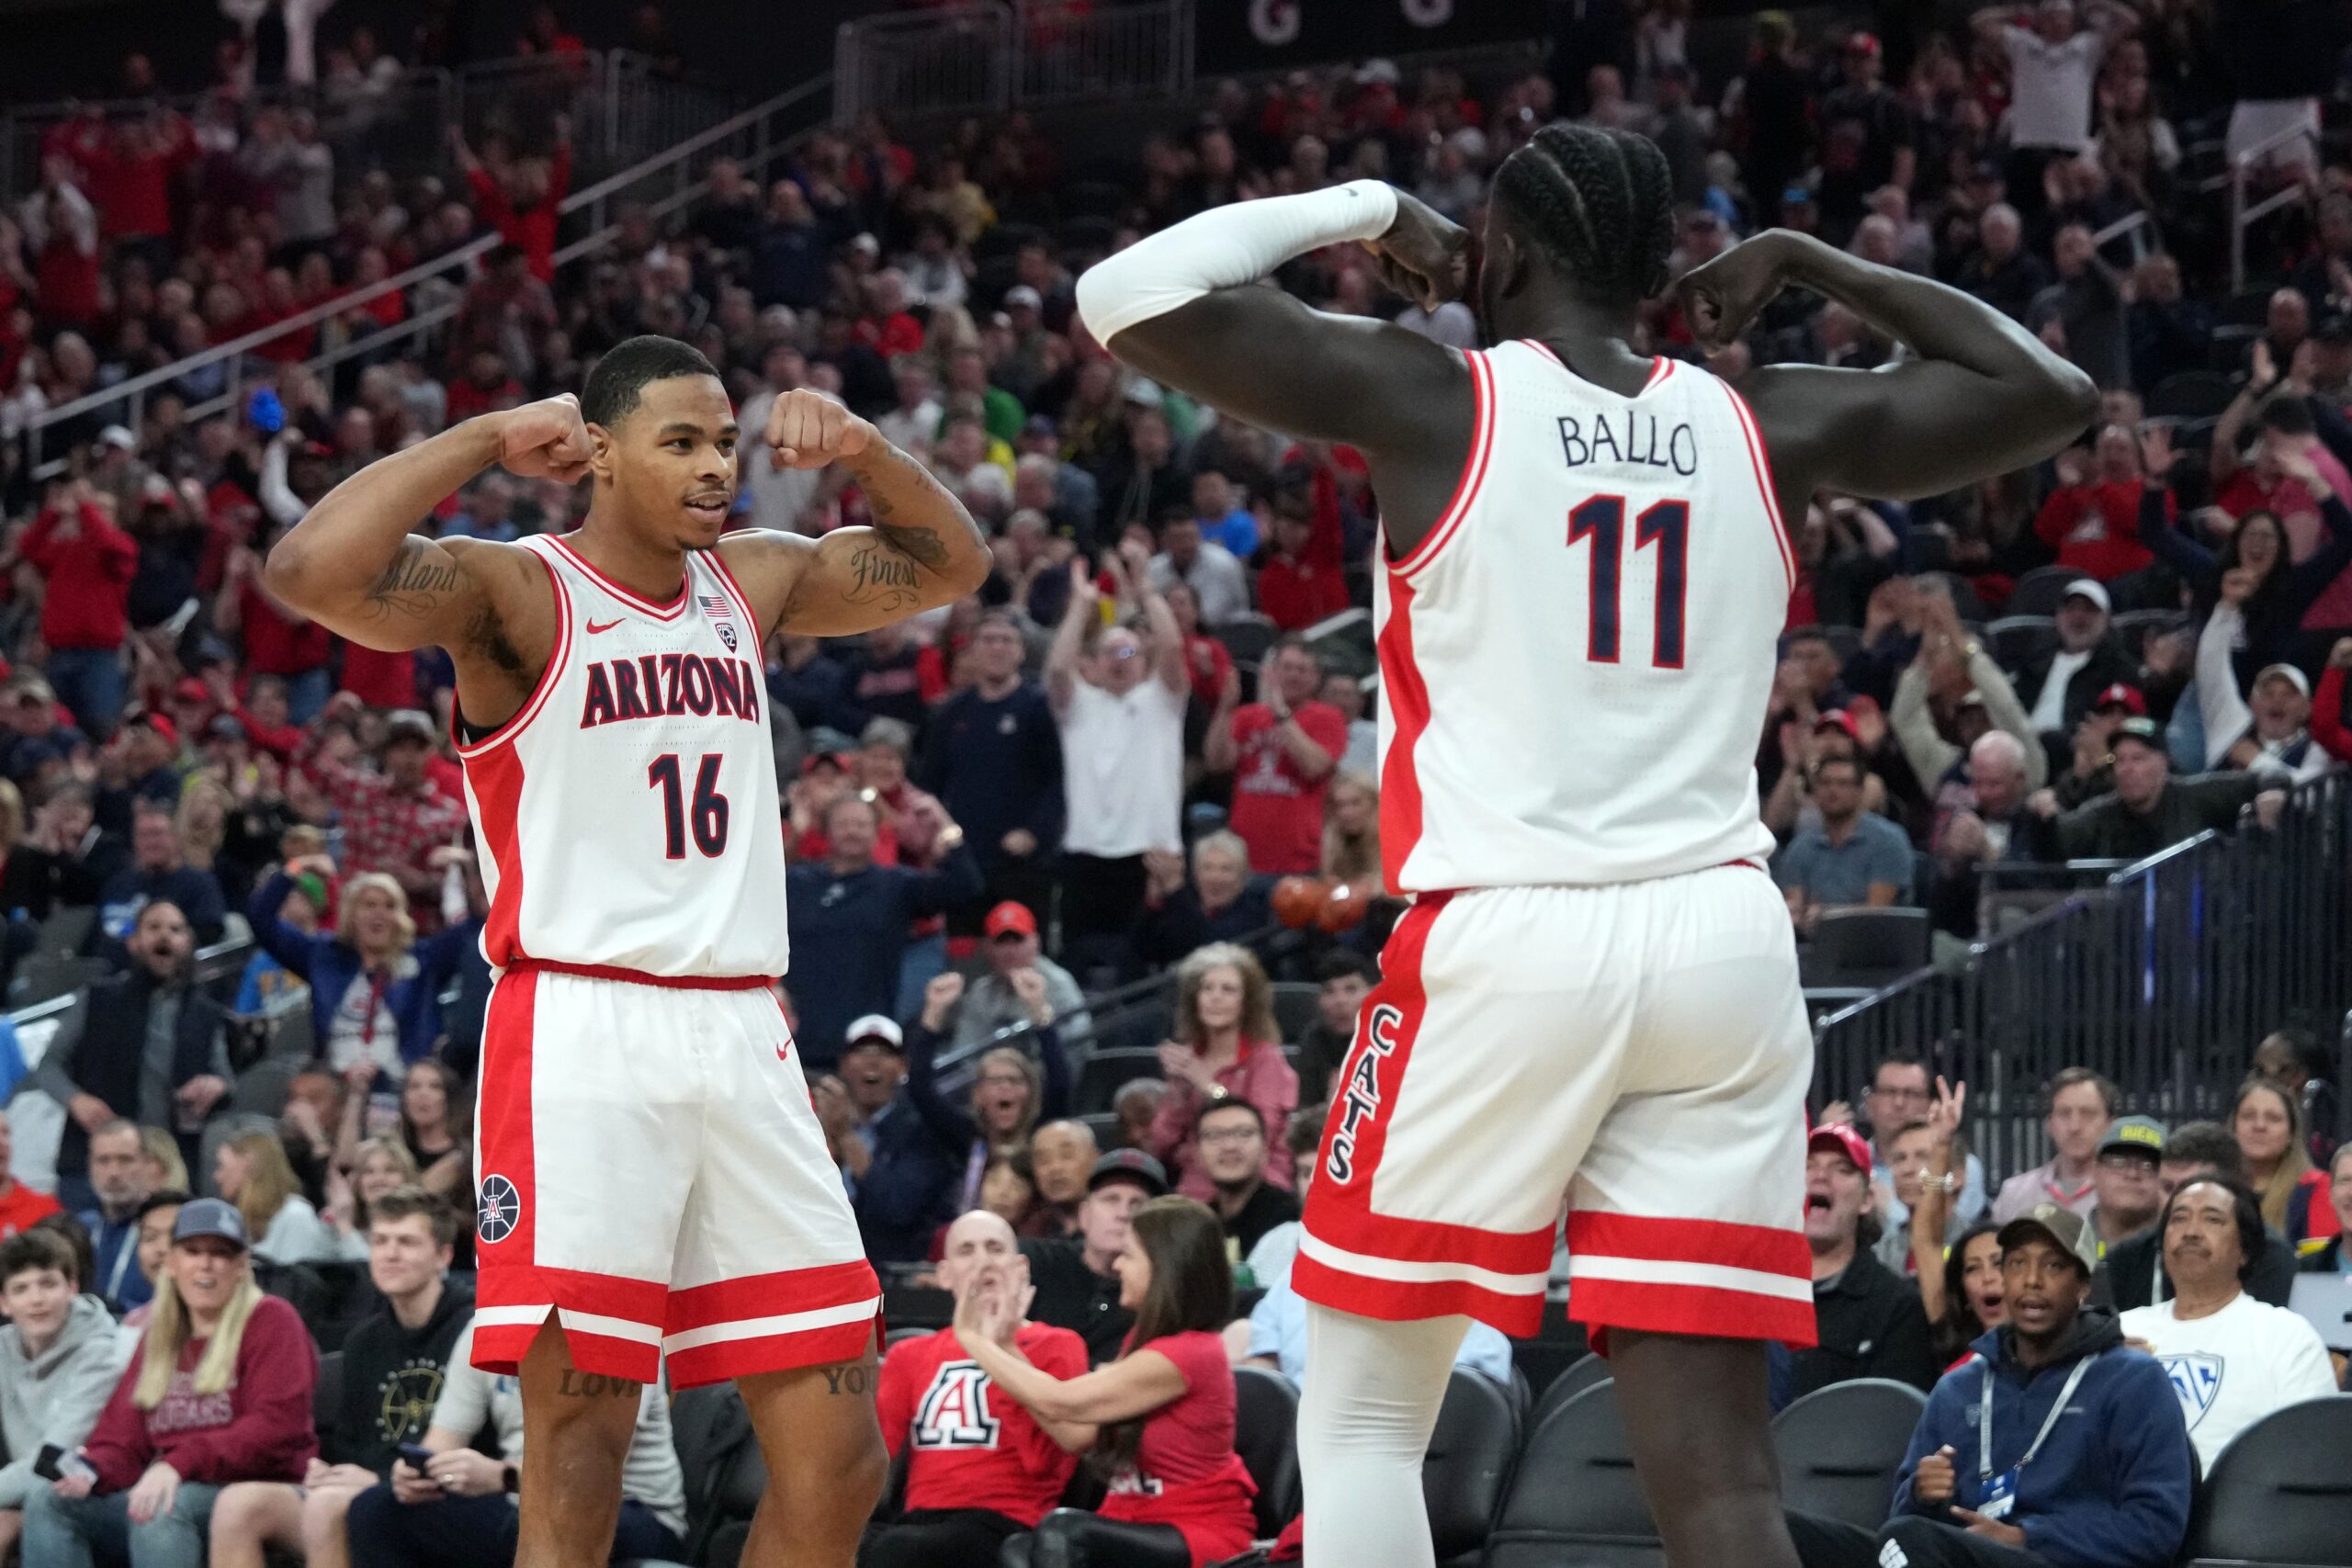 Arizona Wildcats center Oumar Ballo (11) and forward Keshad Johnson (16) celebrate in the first half against the Oregon Ducks at T-Mobile Arena. Mandatory Credit: Kirby Lee-USA TODAY Sports